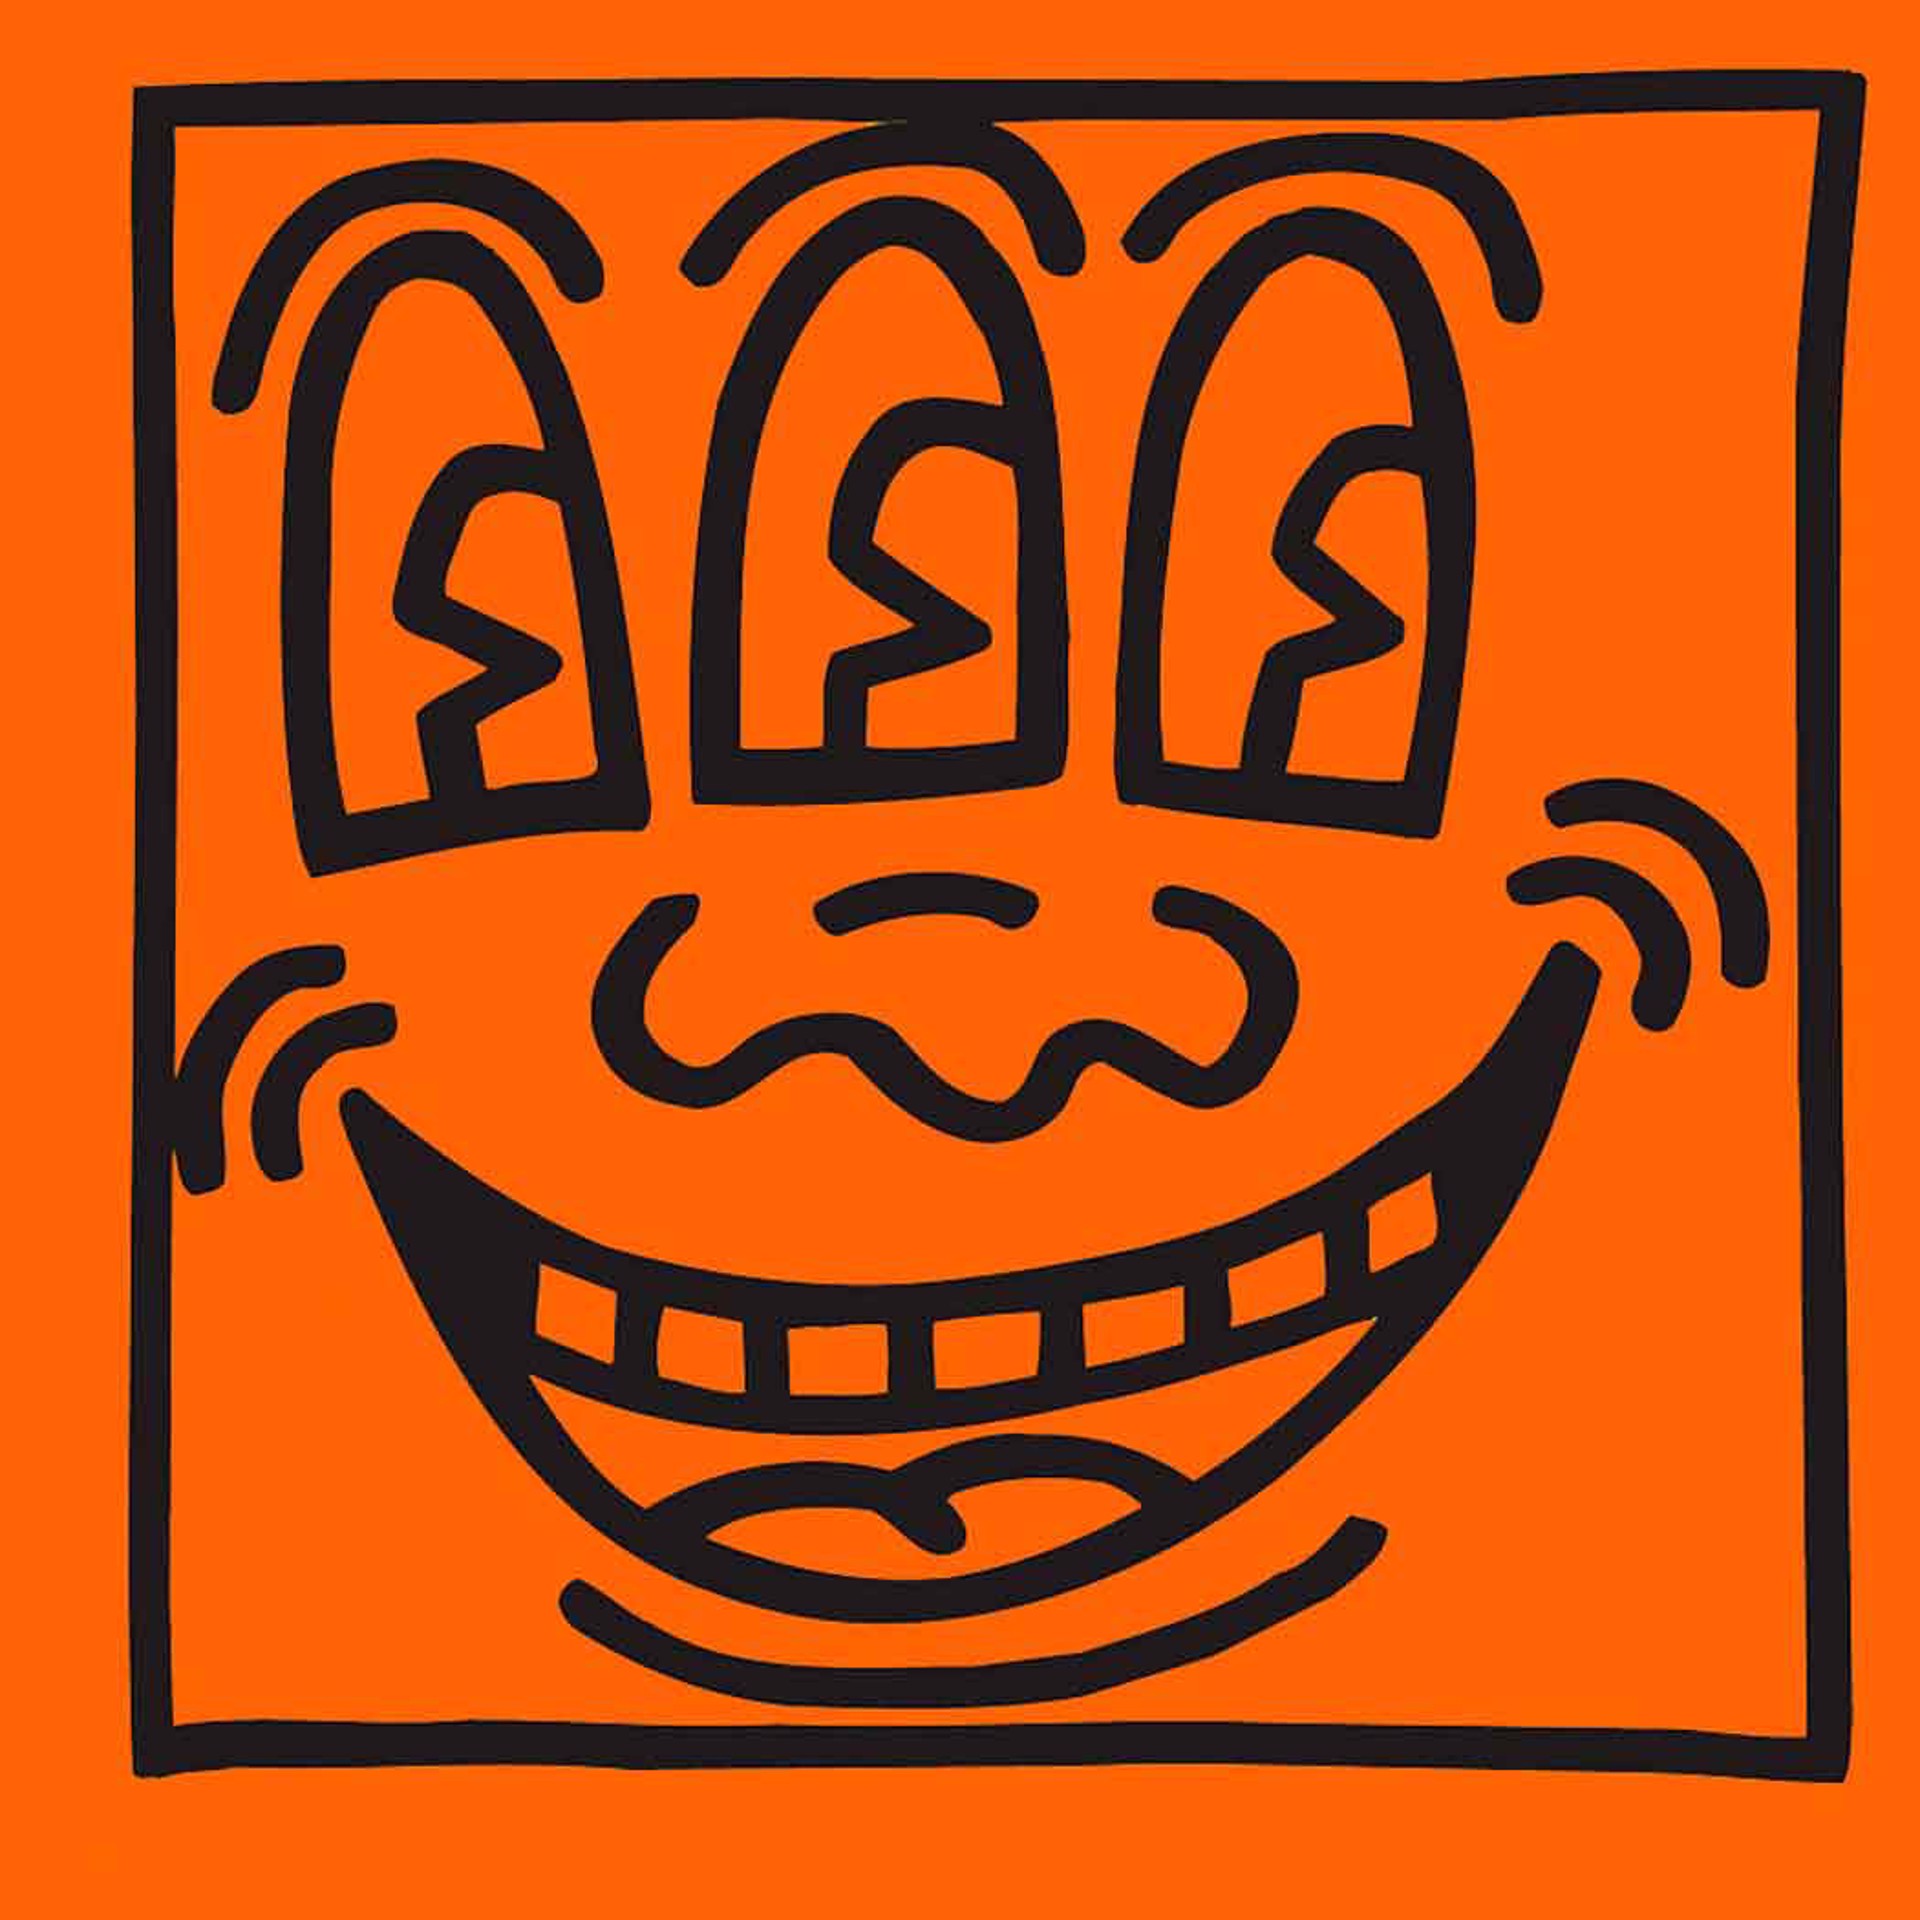 Three Eyed Face on Orange 3x3 Square Magnet by Keith Haring